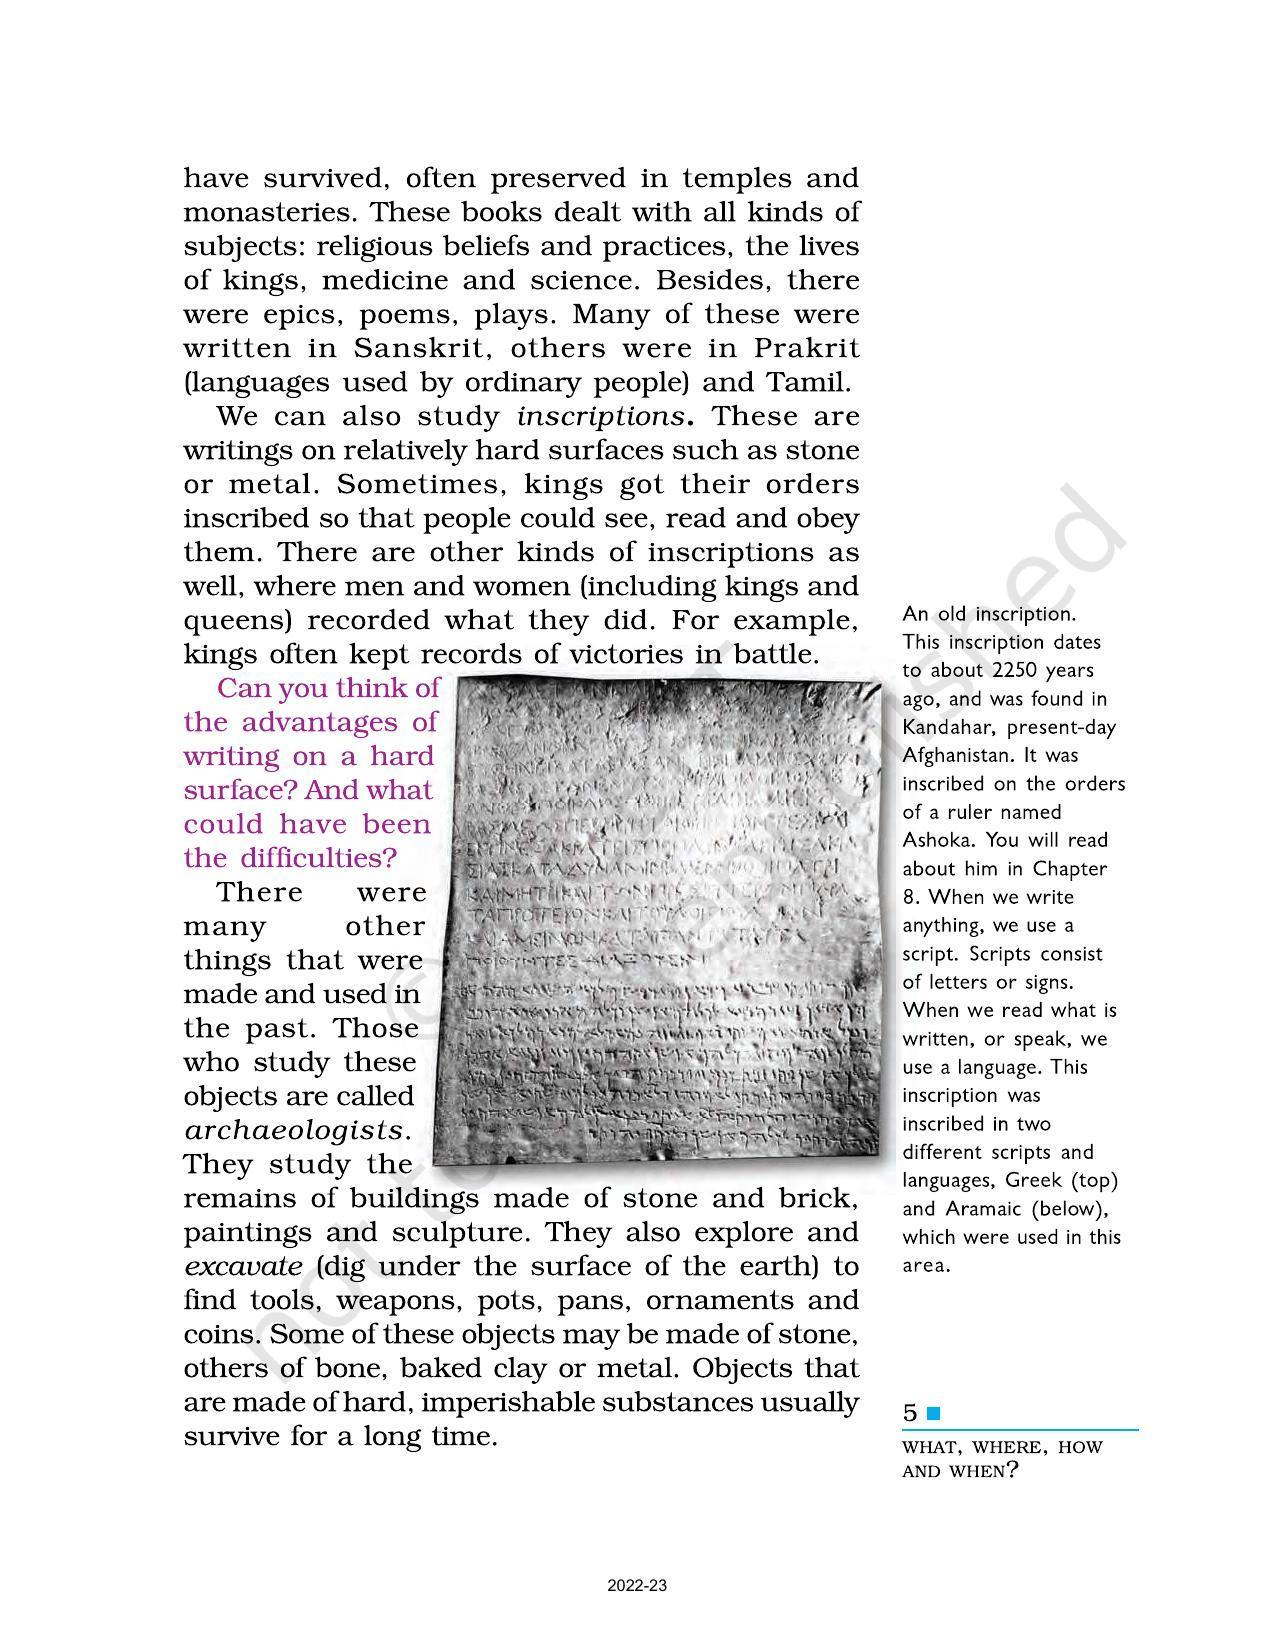 NCERT Book for Class 6 History (Social Science) : Chapter 1-What Where, How, and When? - Page 5